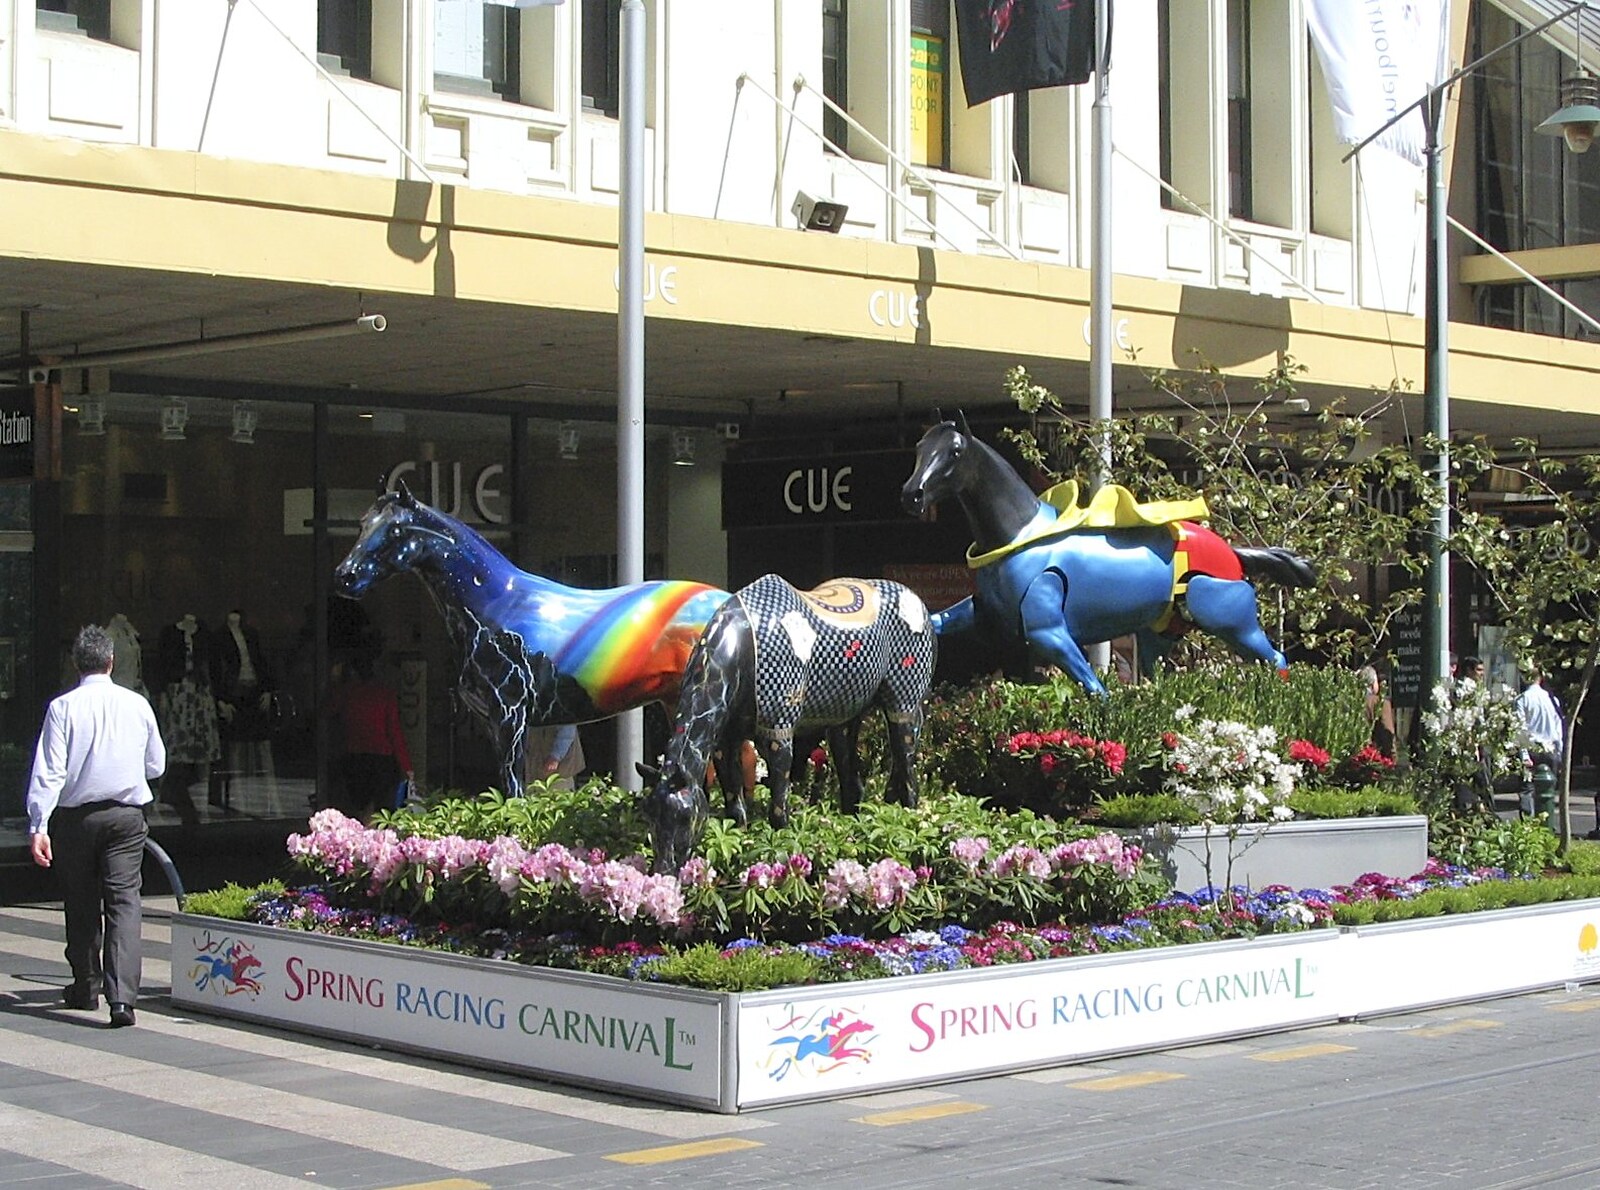 Funky rainbow horses from A Couple of Days in Melbourne, Victoria, Australia - 5th October 2004